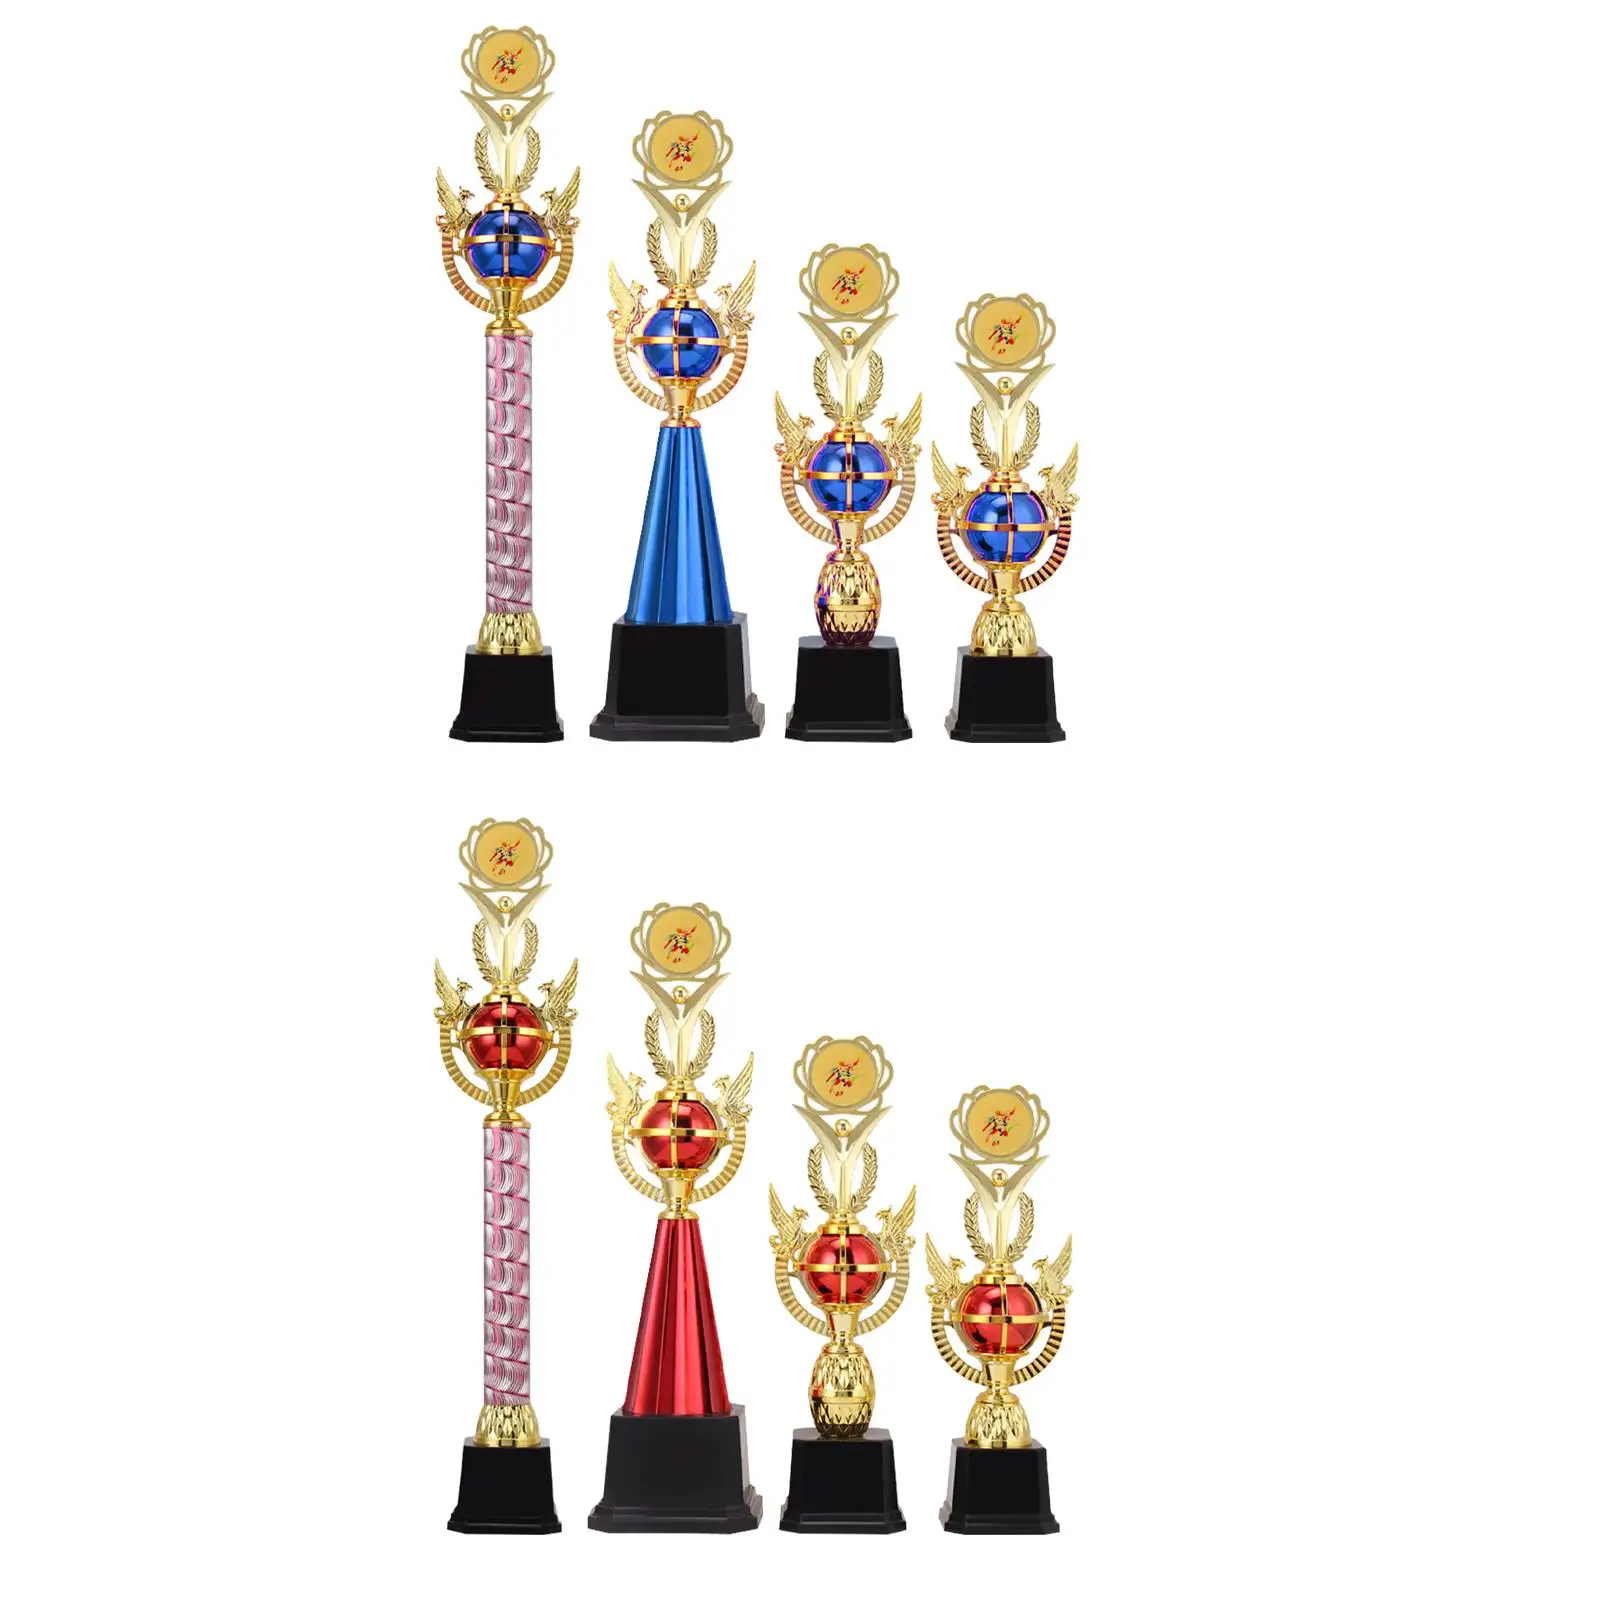 Award Trophy Cup Creative Trophies Prize for Party Football Match